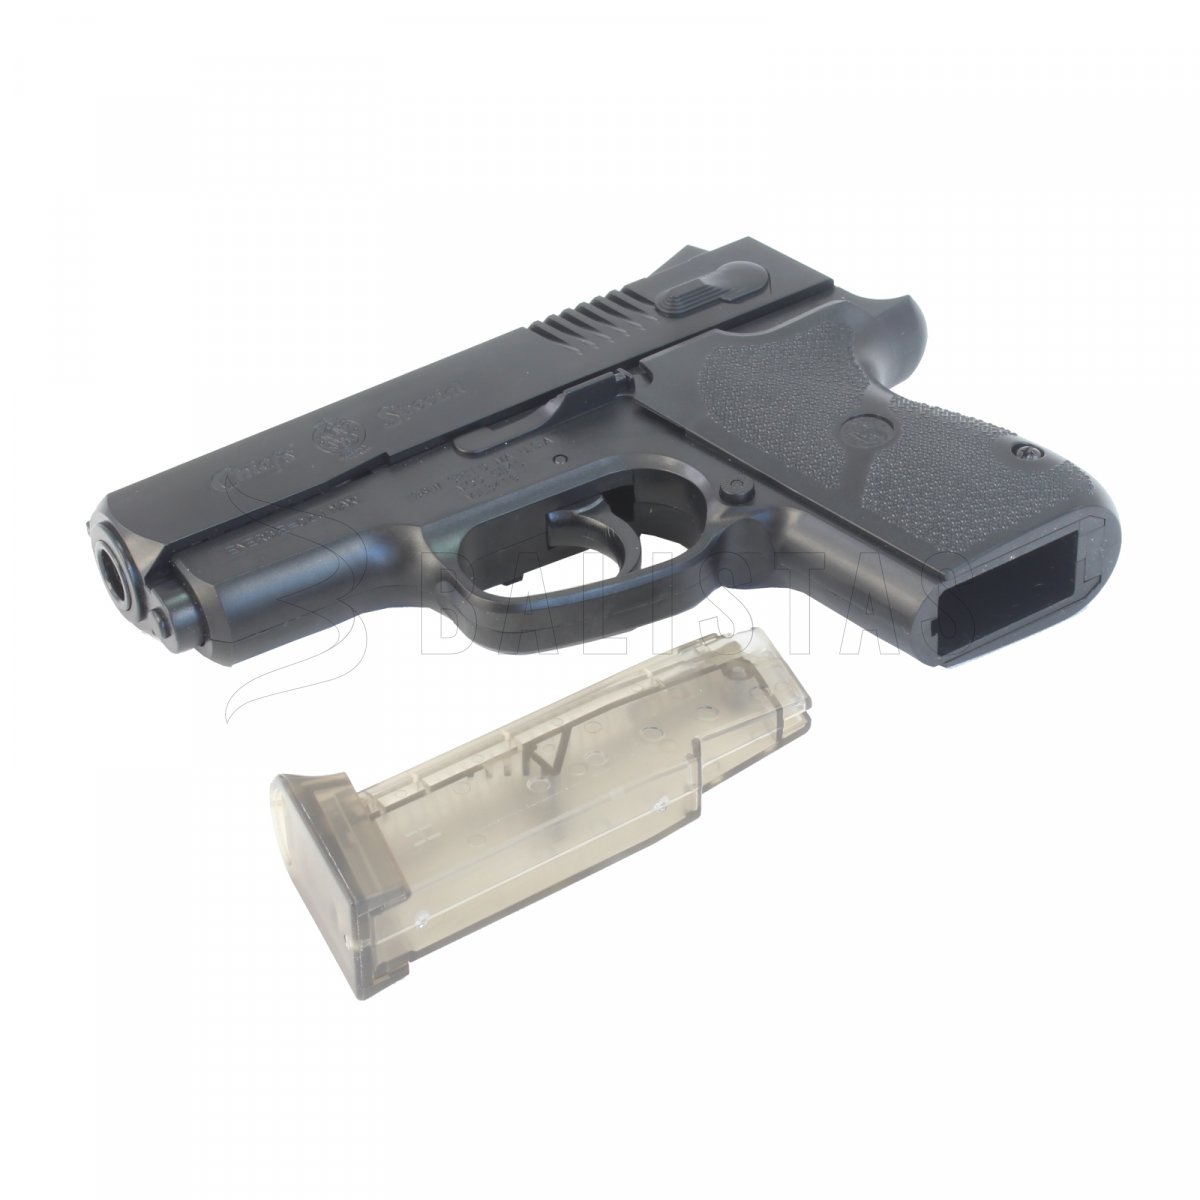 Airsoft Pistole CYBG S&W Chief Special CS45